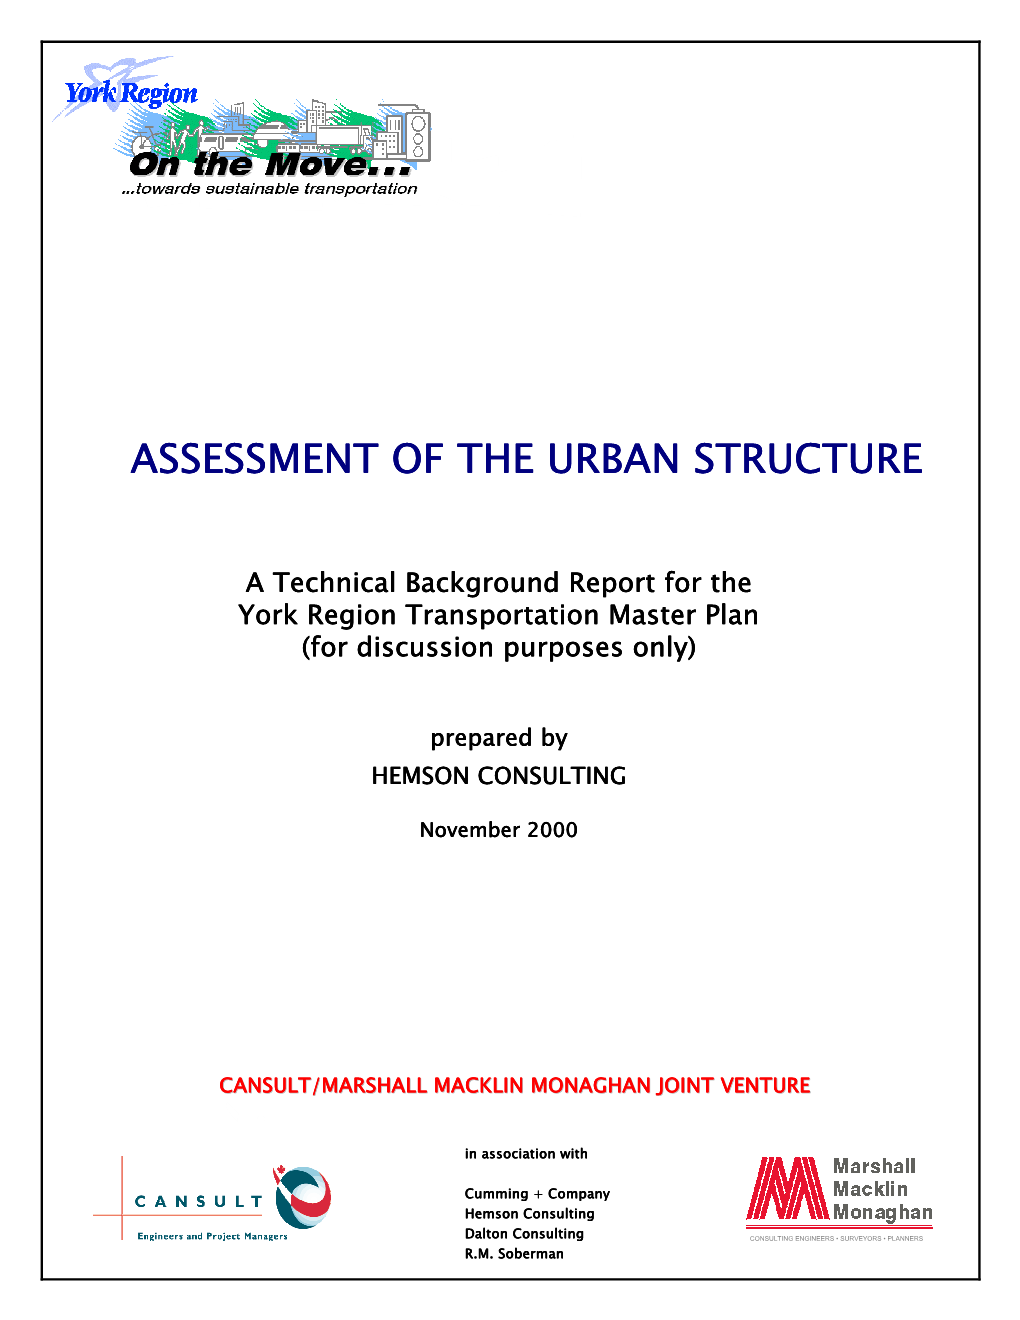 Assessment of Urban Structure